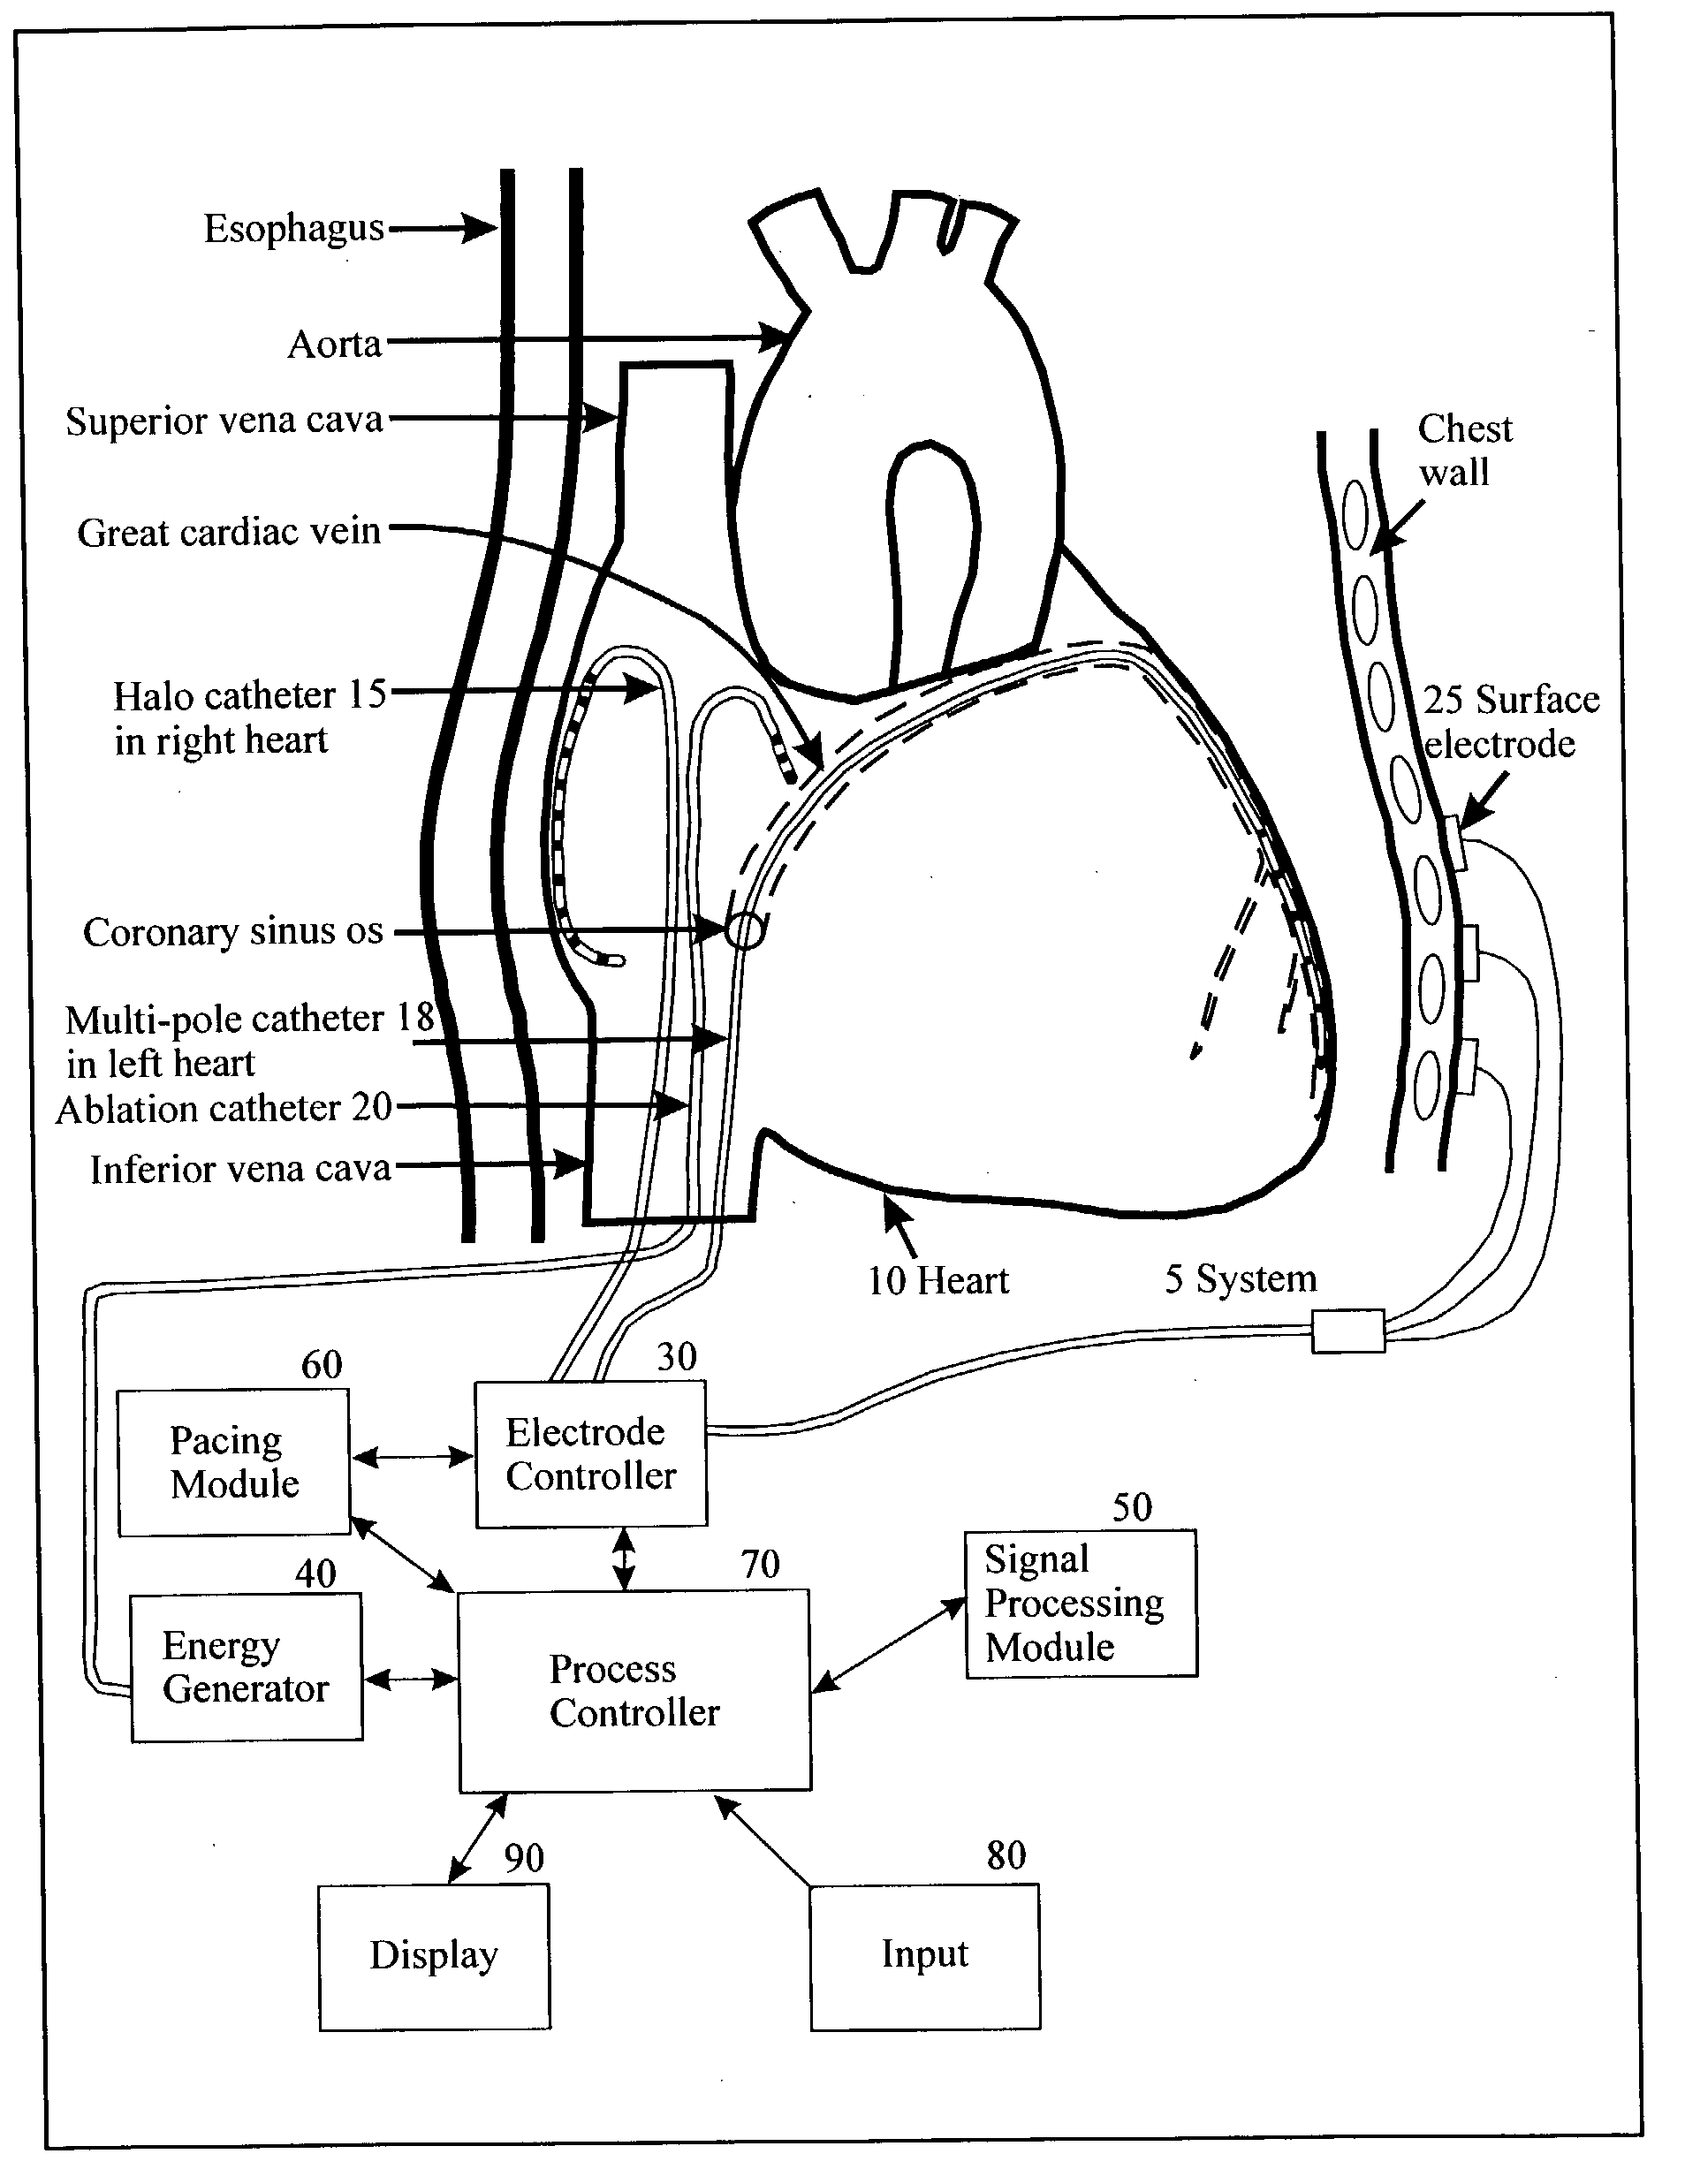 Method and apparatus for classifying and localizing heart arrhythmias